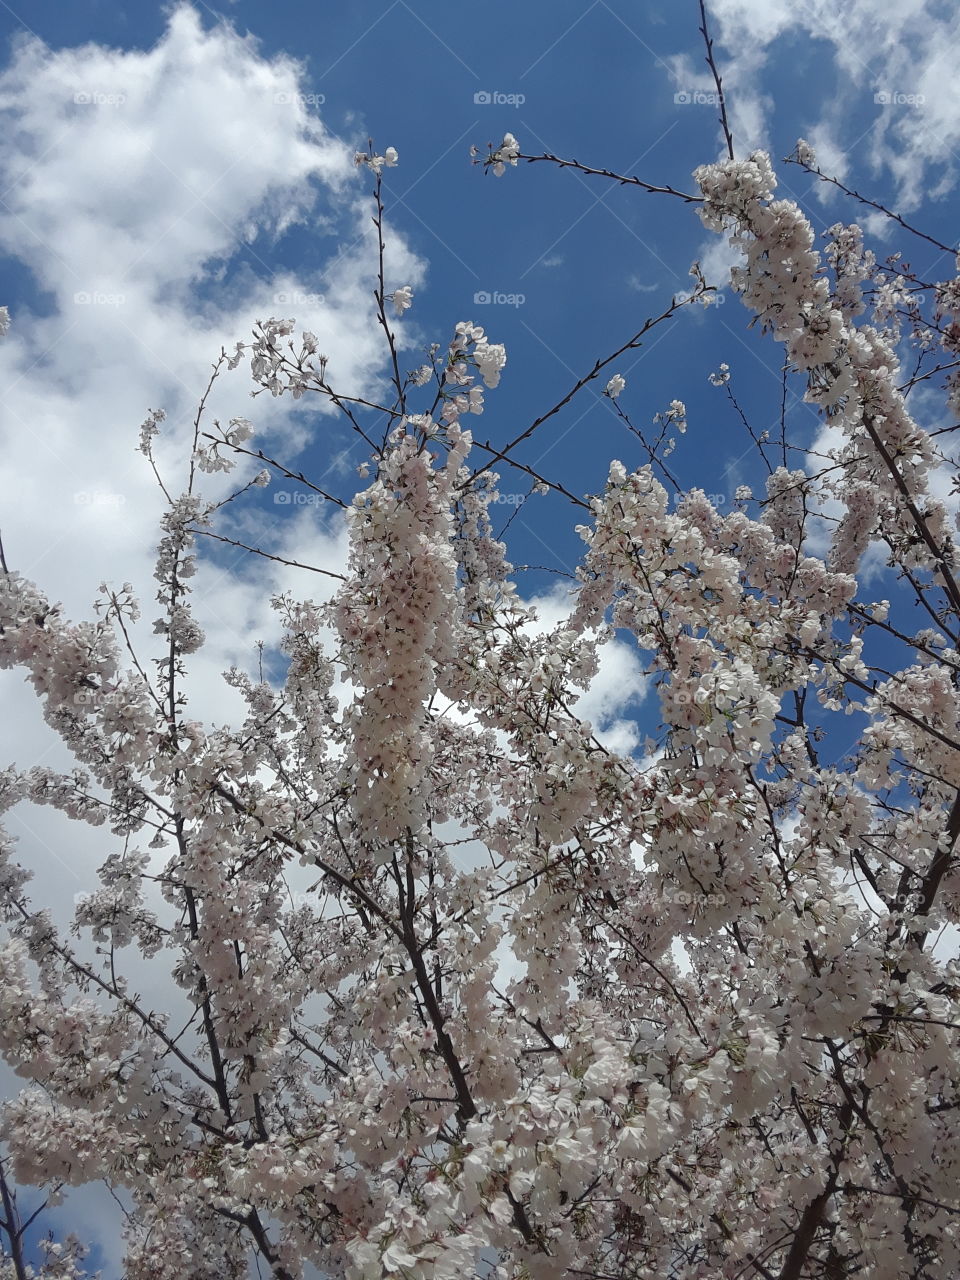 A beautiful tree blooms with clouds as a backdrop.